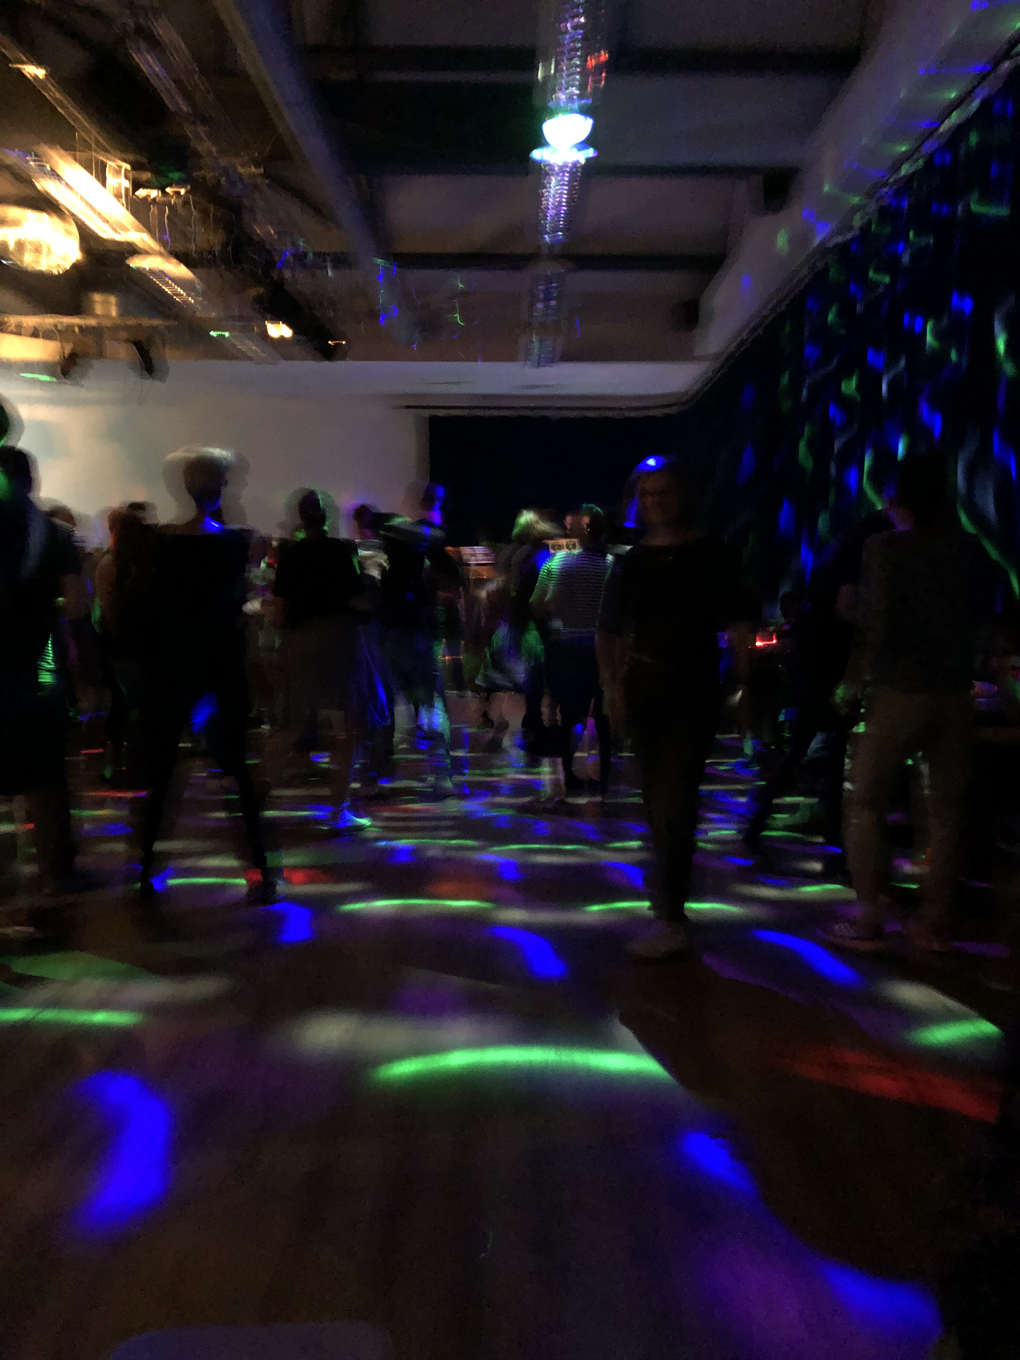 Lots of middle aged people jumping around in room lit with psychedelic lights